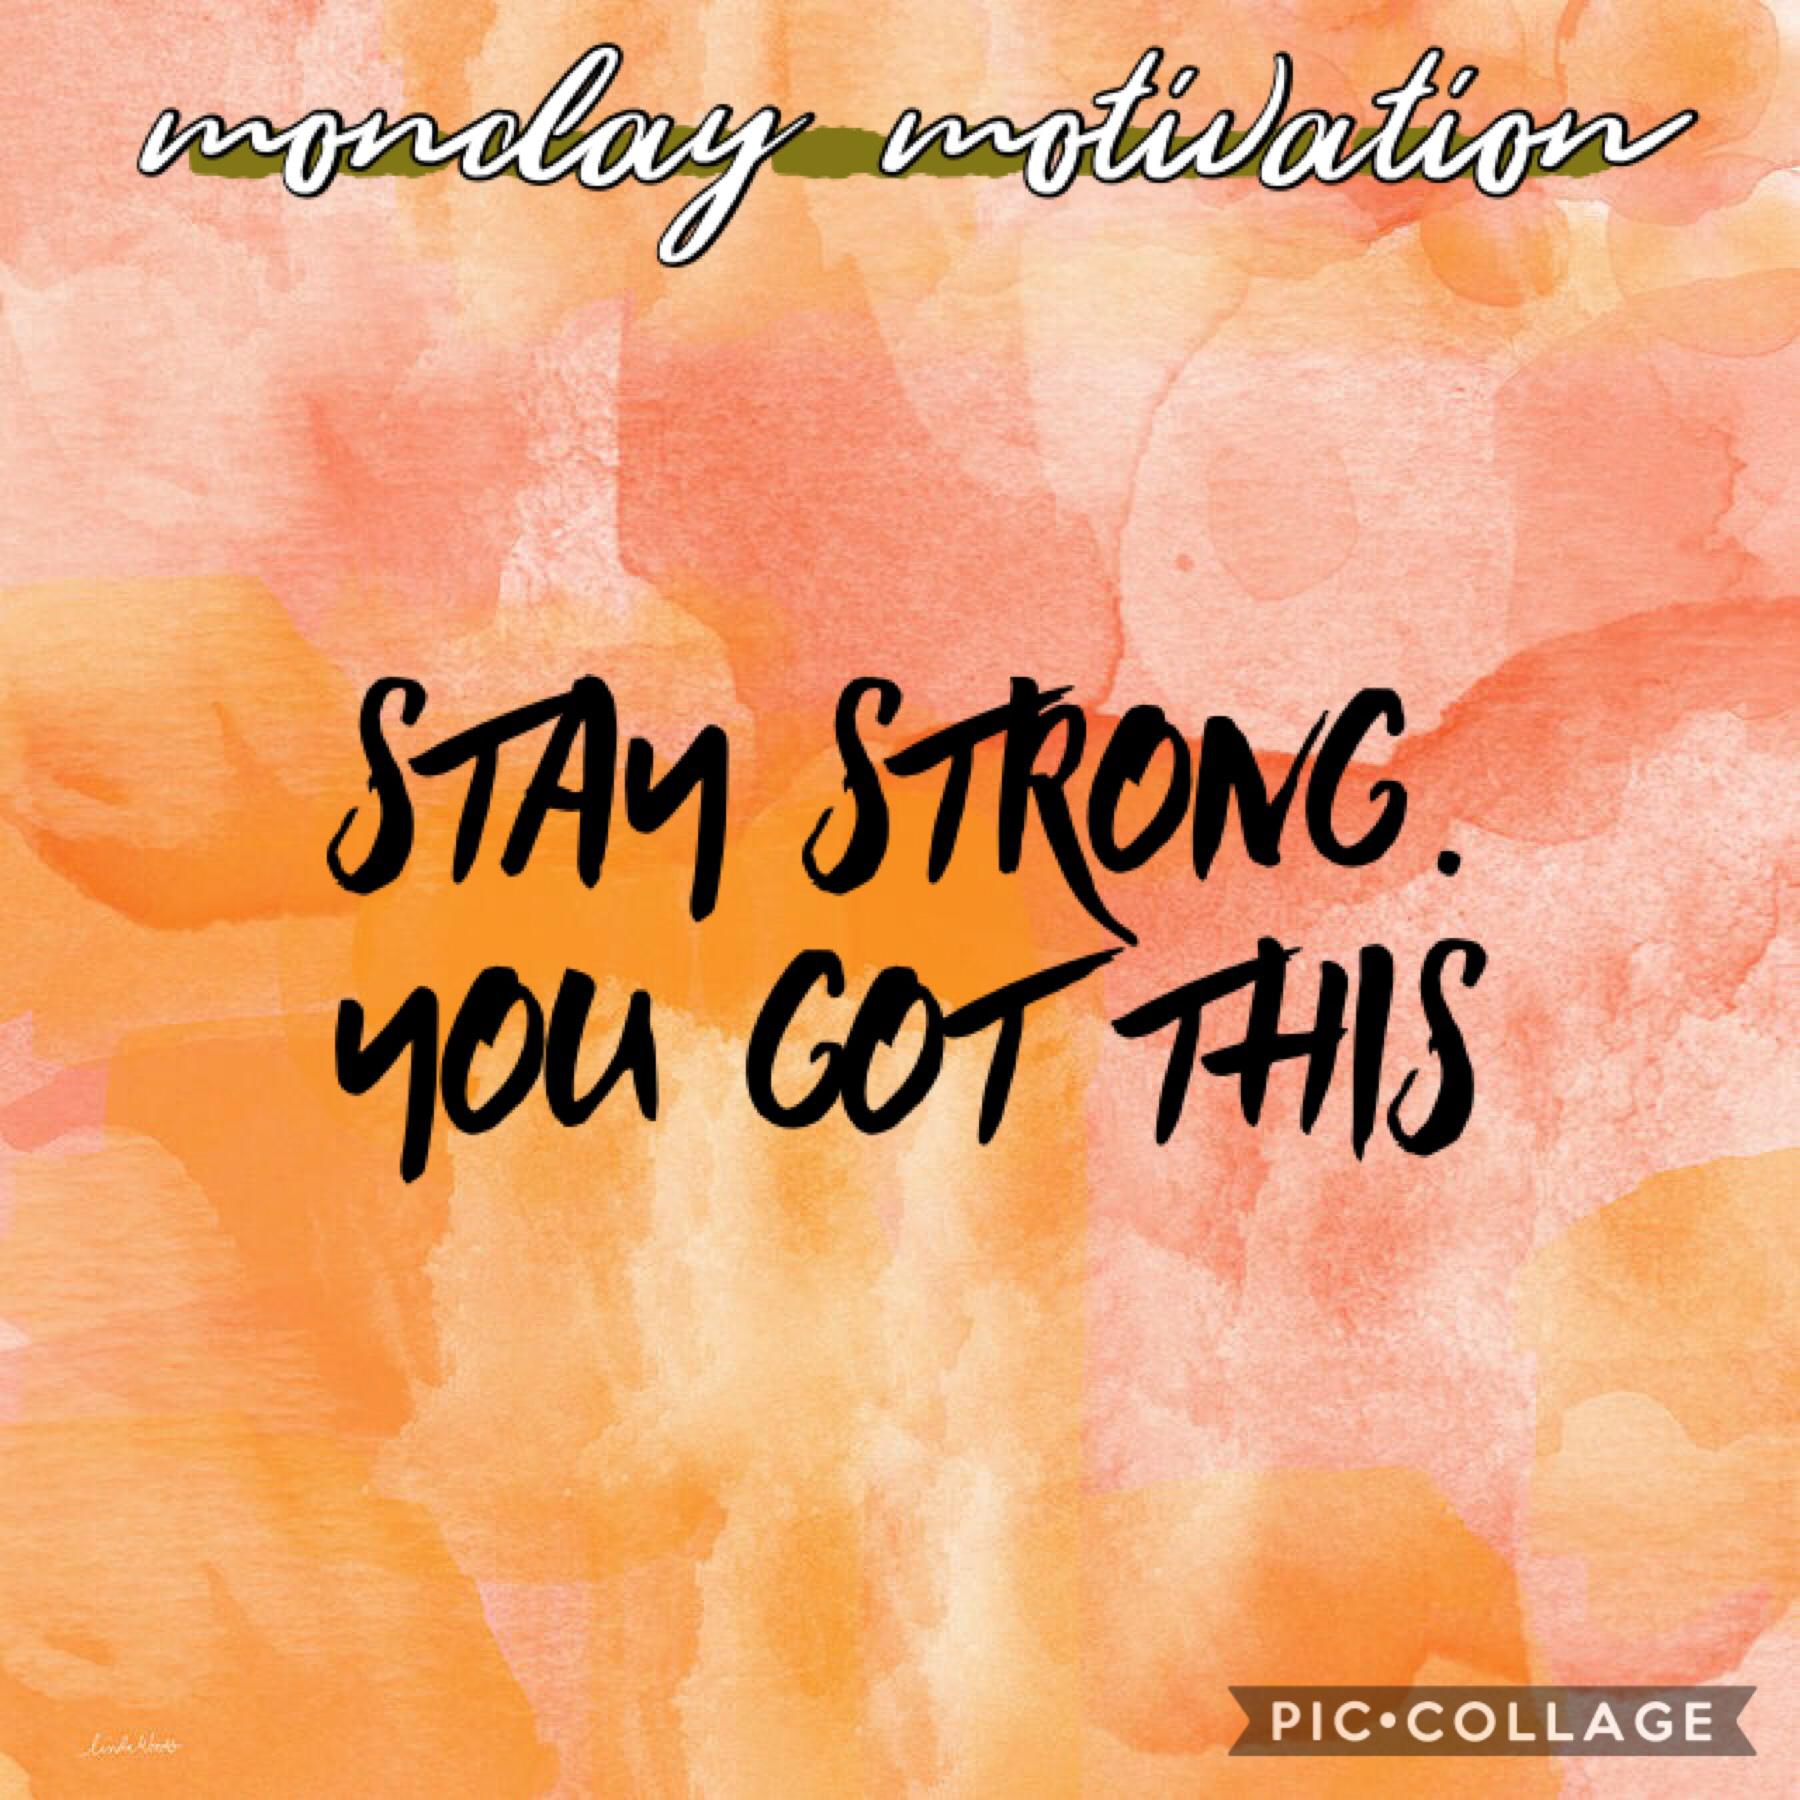 happy monday! just a reminder to stay strong! you can get through anything that’s in your way❤️❤️